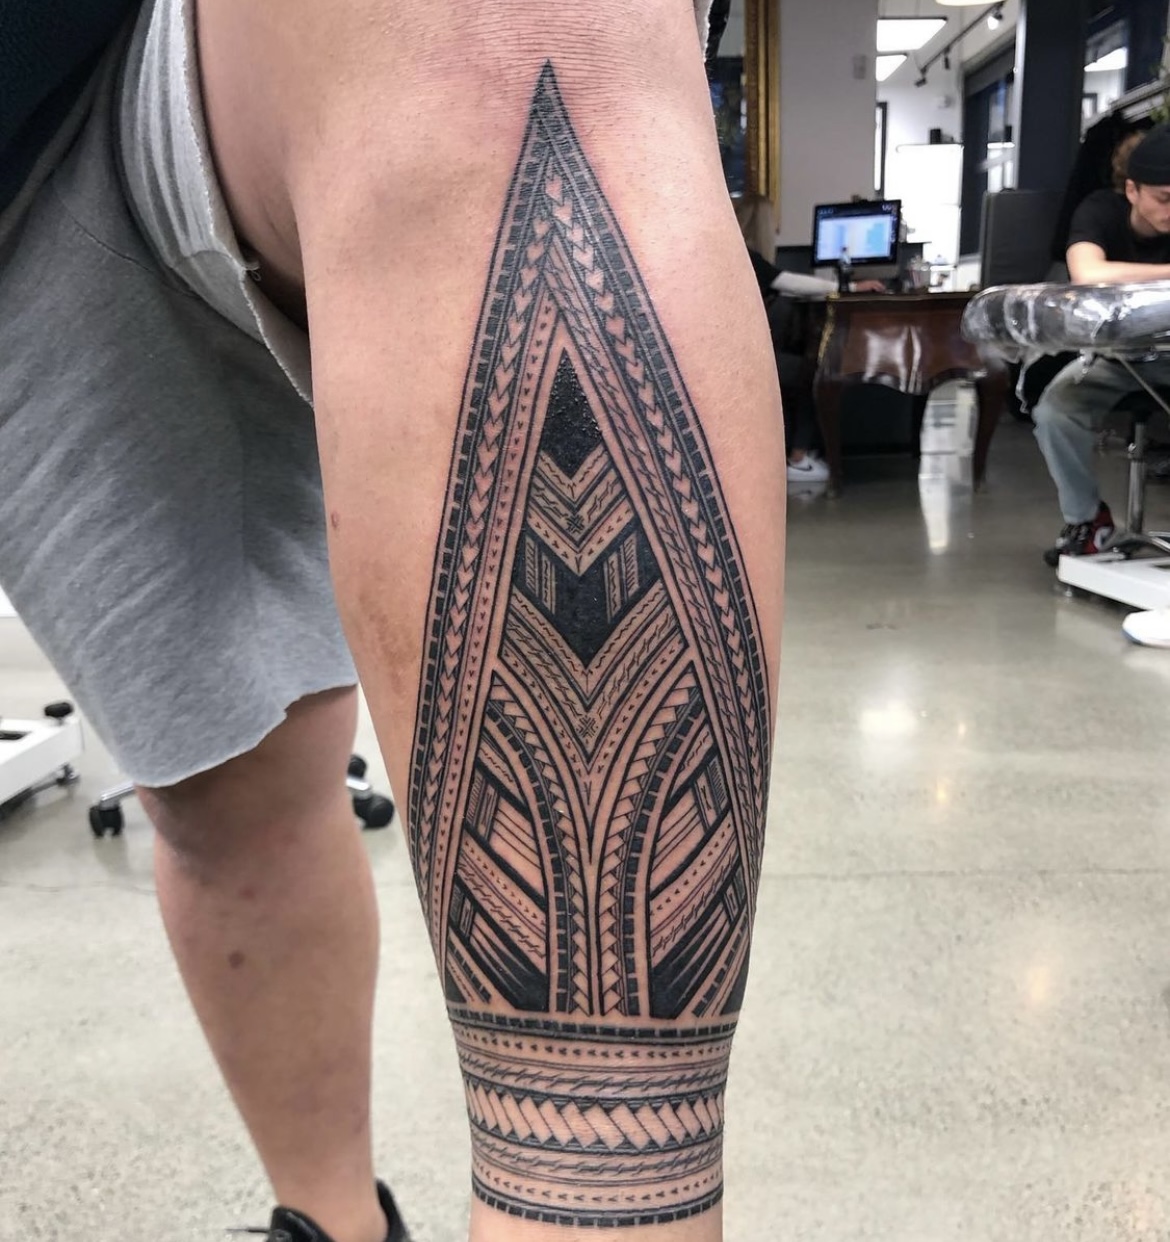 Polynesian tattoos symbolize identity and tell cultural stories | Lifestyle  | dailytitan.com